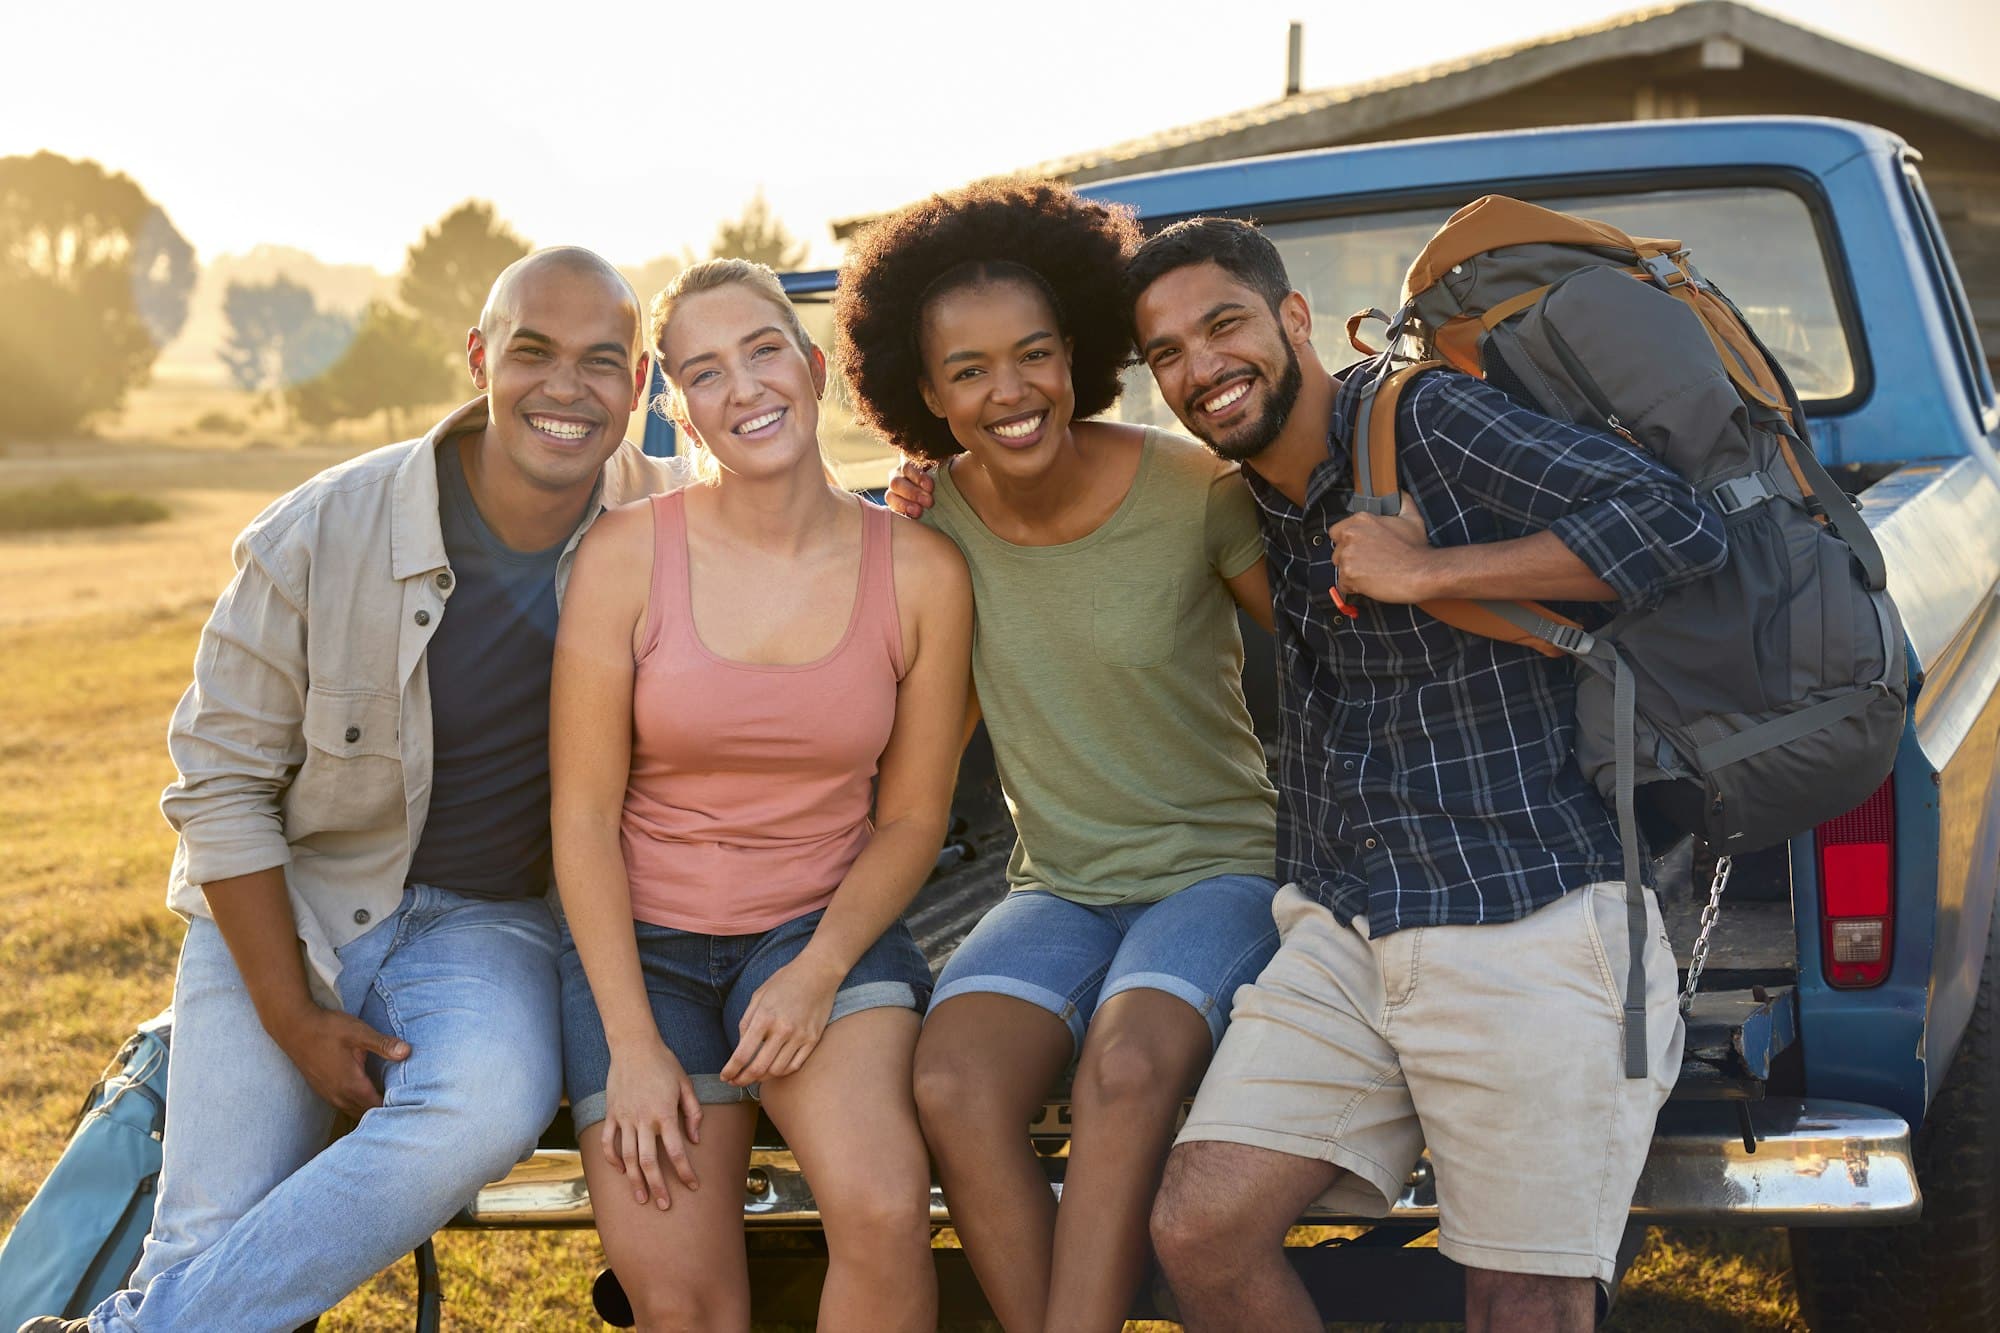 Friends Sitting On Tailgate Of Pick Up Truck On The Way to an Outdoor Concert